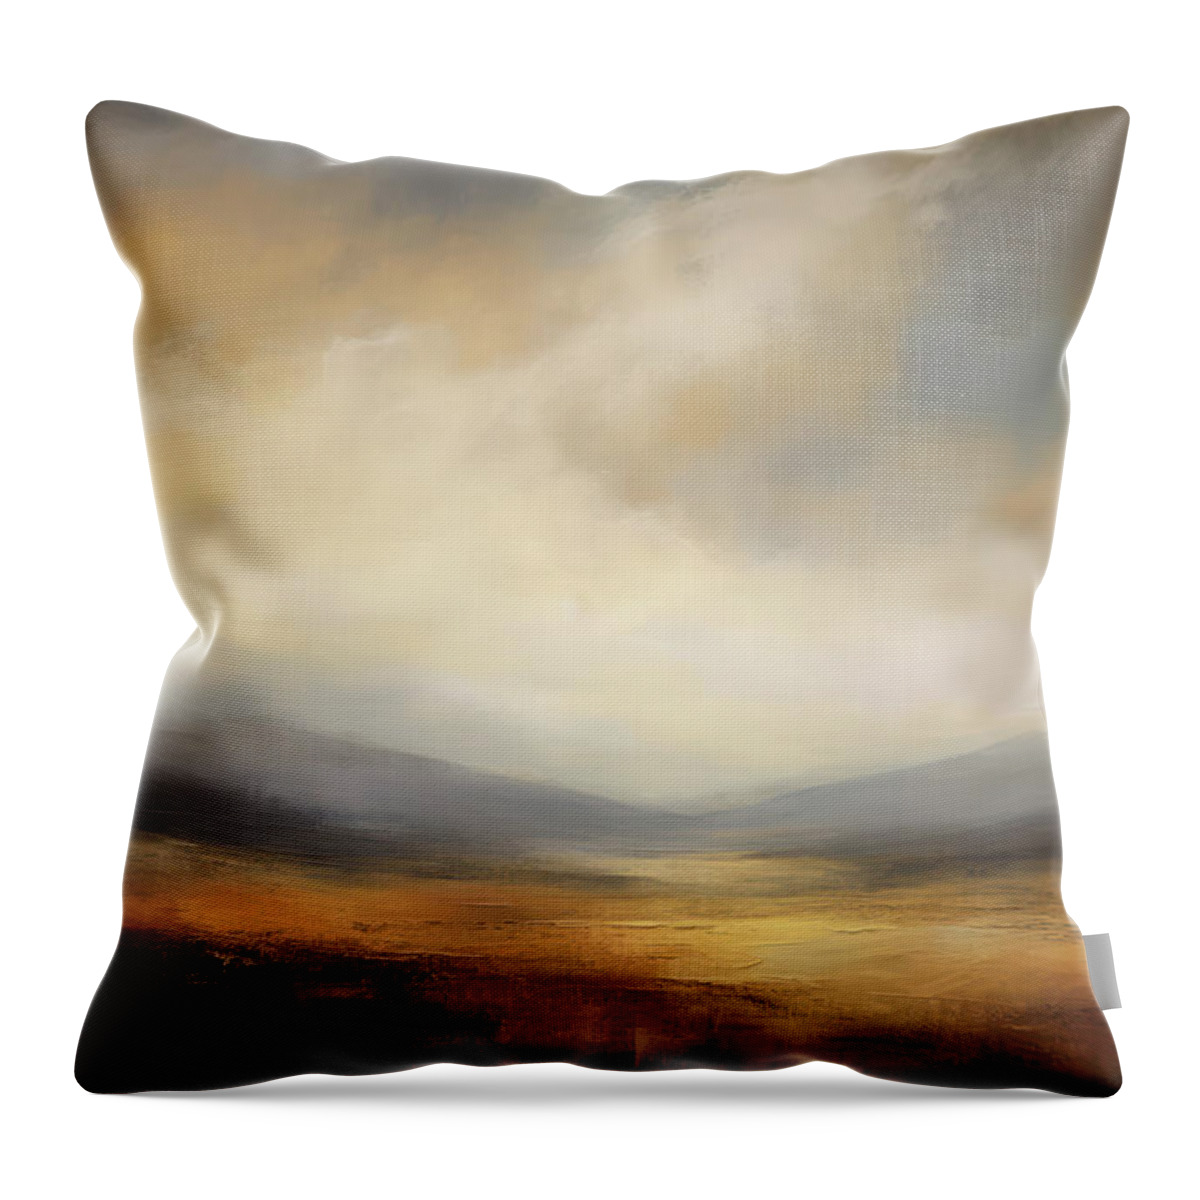 Wide Open Spaces Throw Pillow featuring the painting Wide Open Spaces Desert Dreams 2 by Jai Johnson